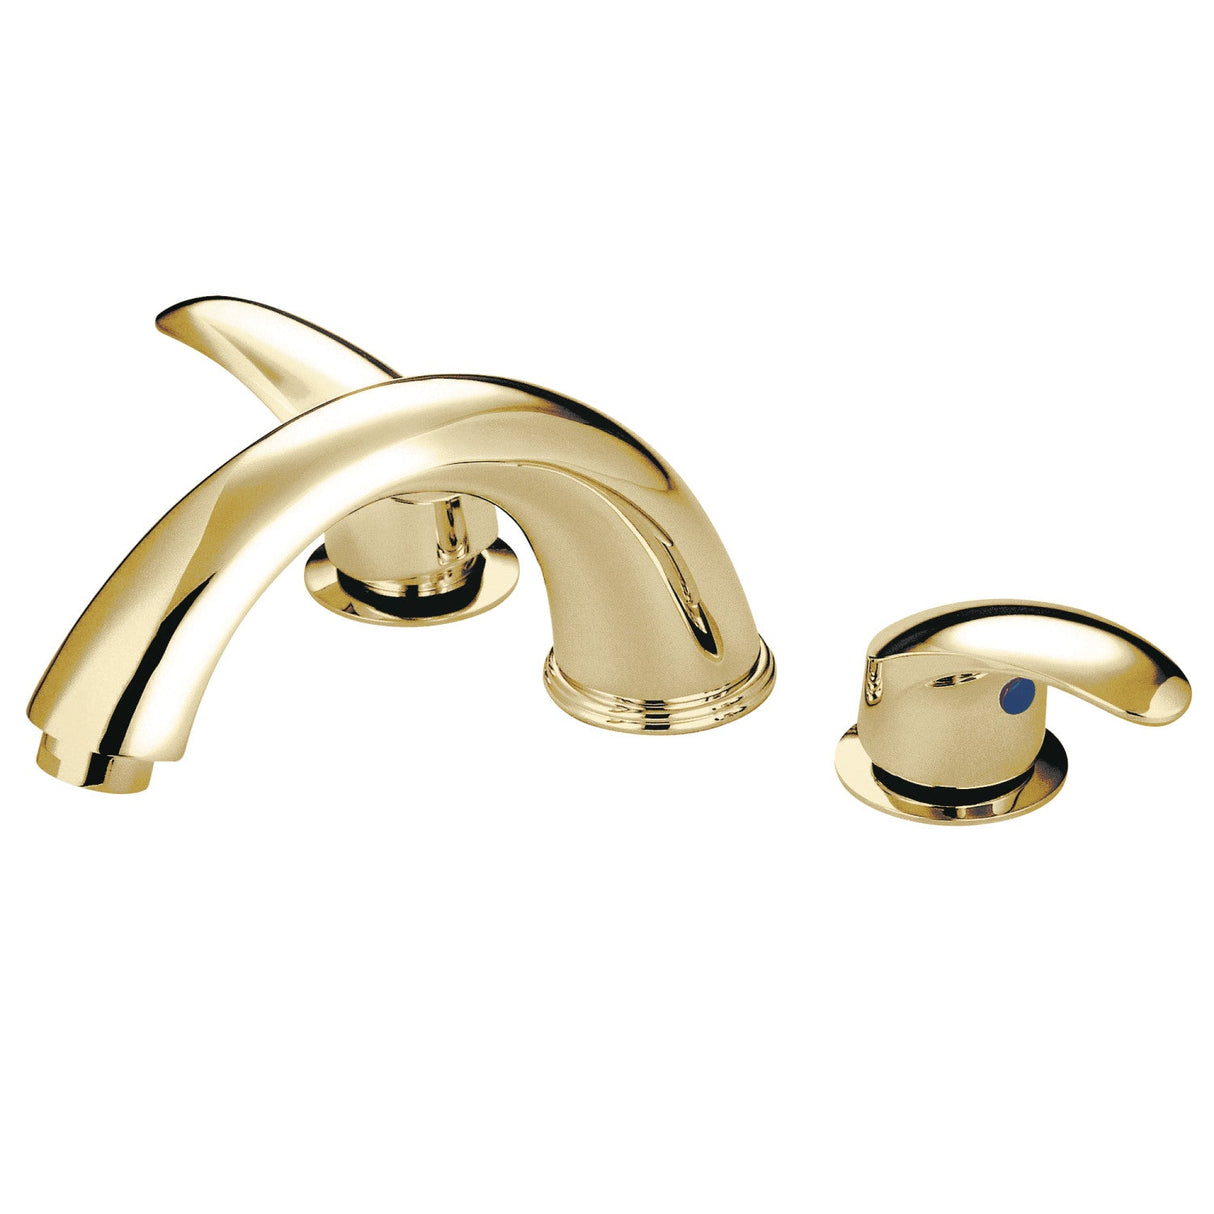 KS6362LL Two-Handle 3-Hole Deck Mount Roman Tub Faucet, Polished Brass